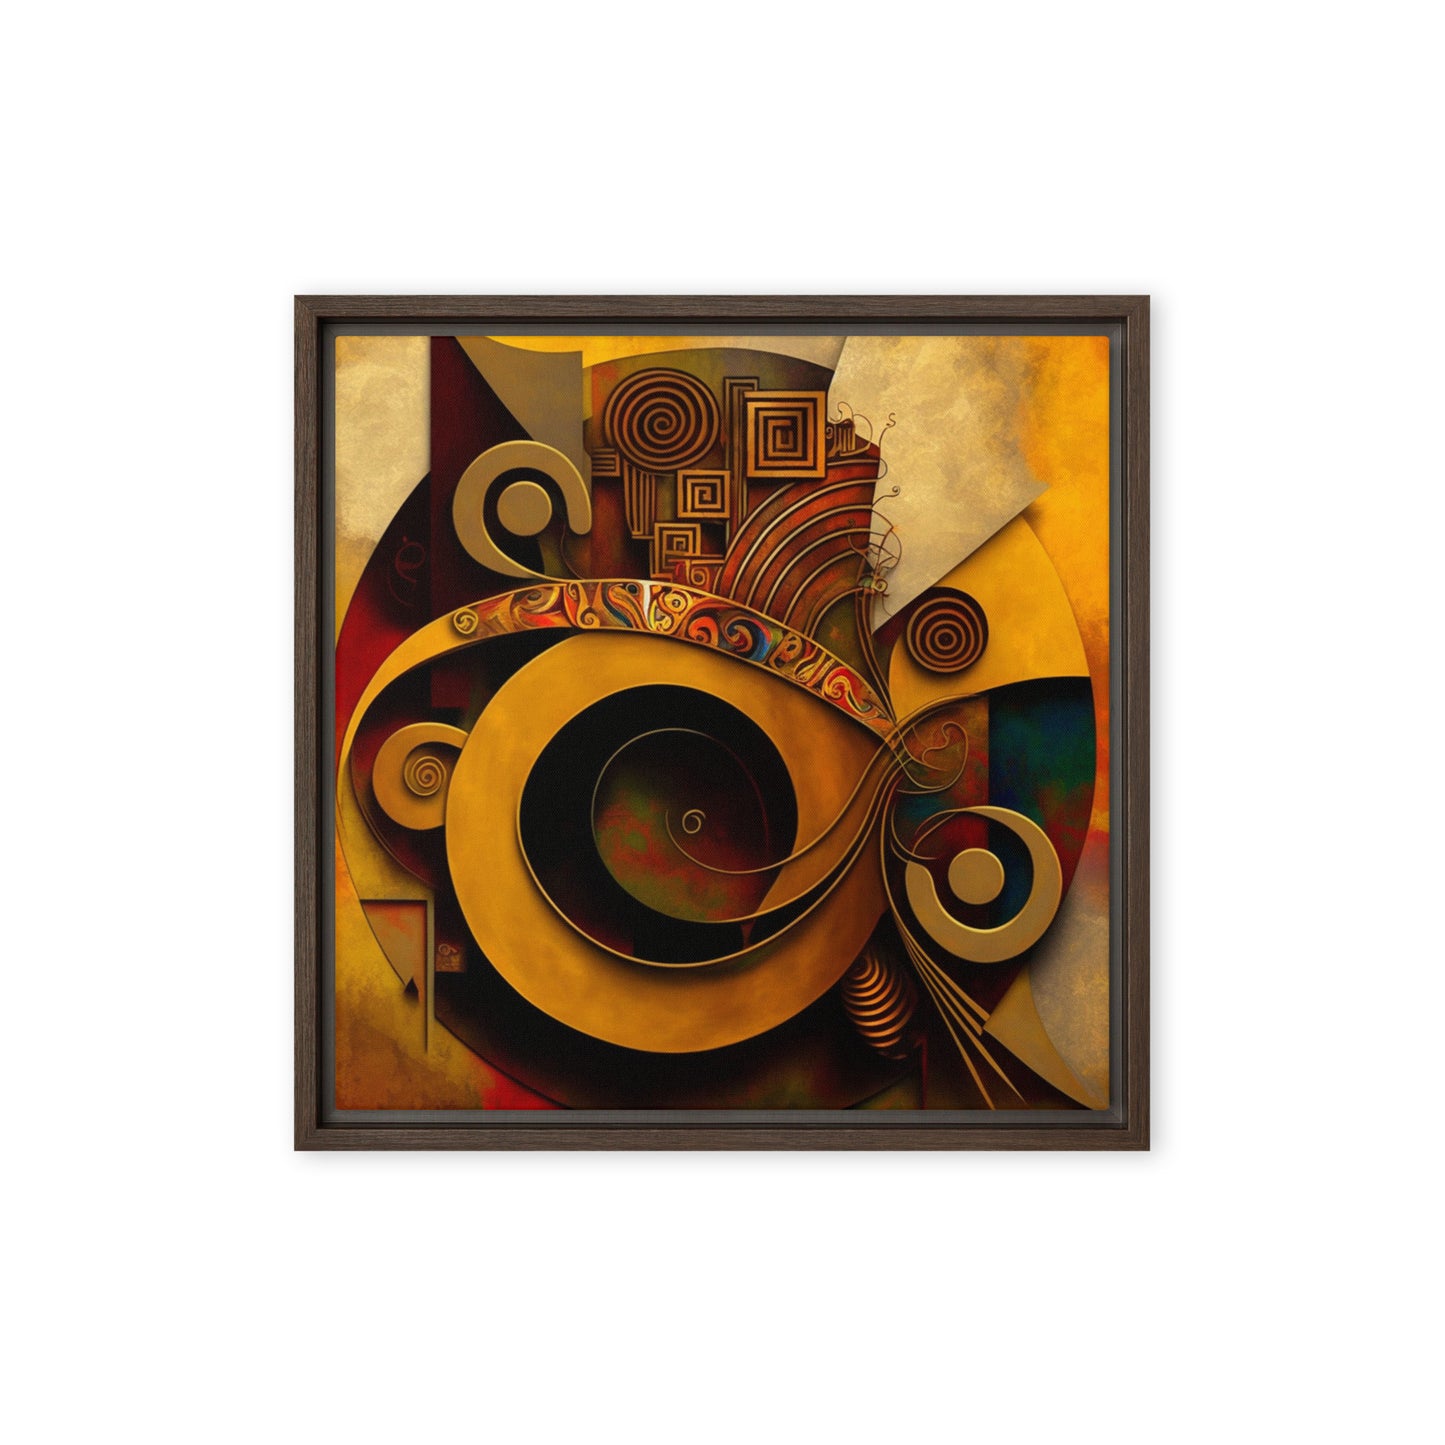 'VISUALIZE' abstract African art: Framed canvas art